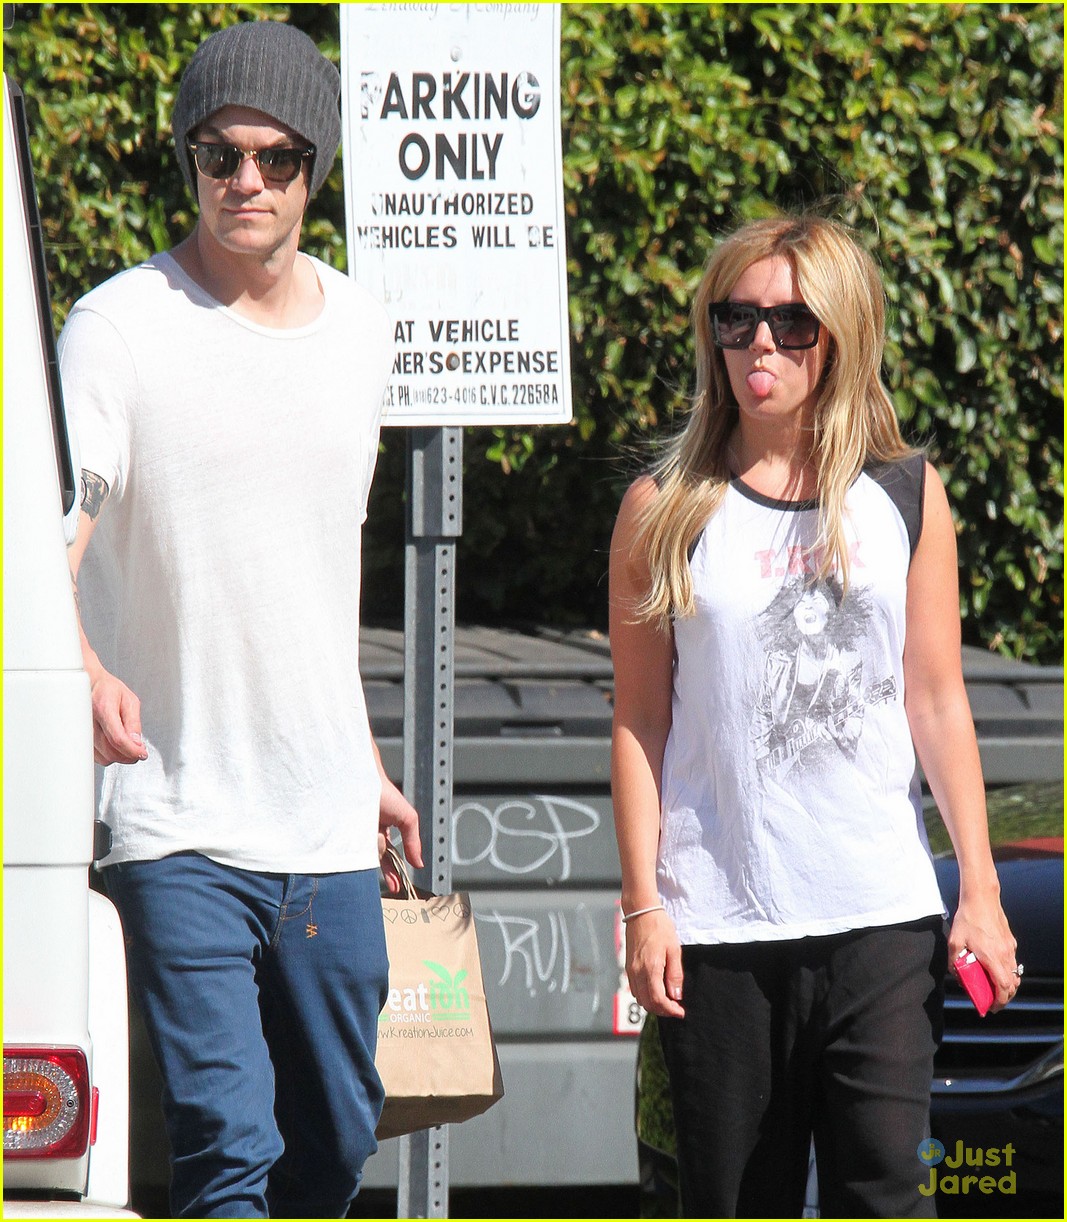 ashley tisdale christopher french los angeles lunch 30